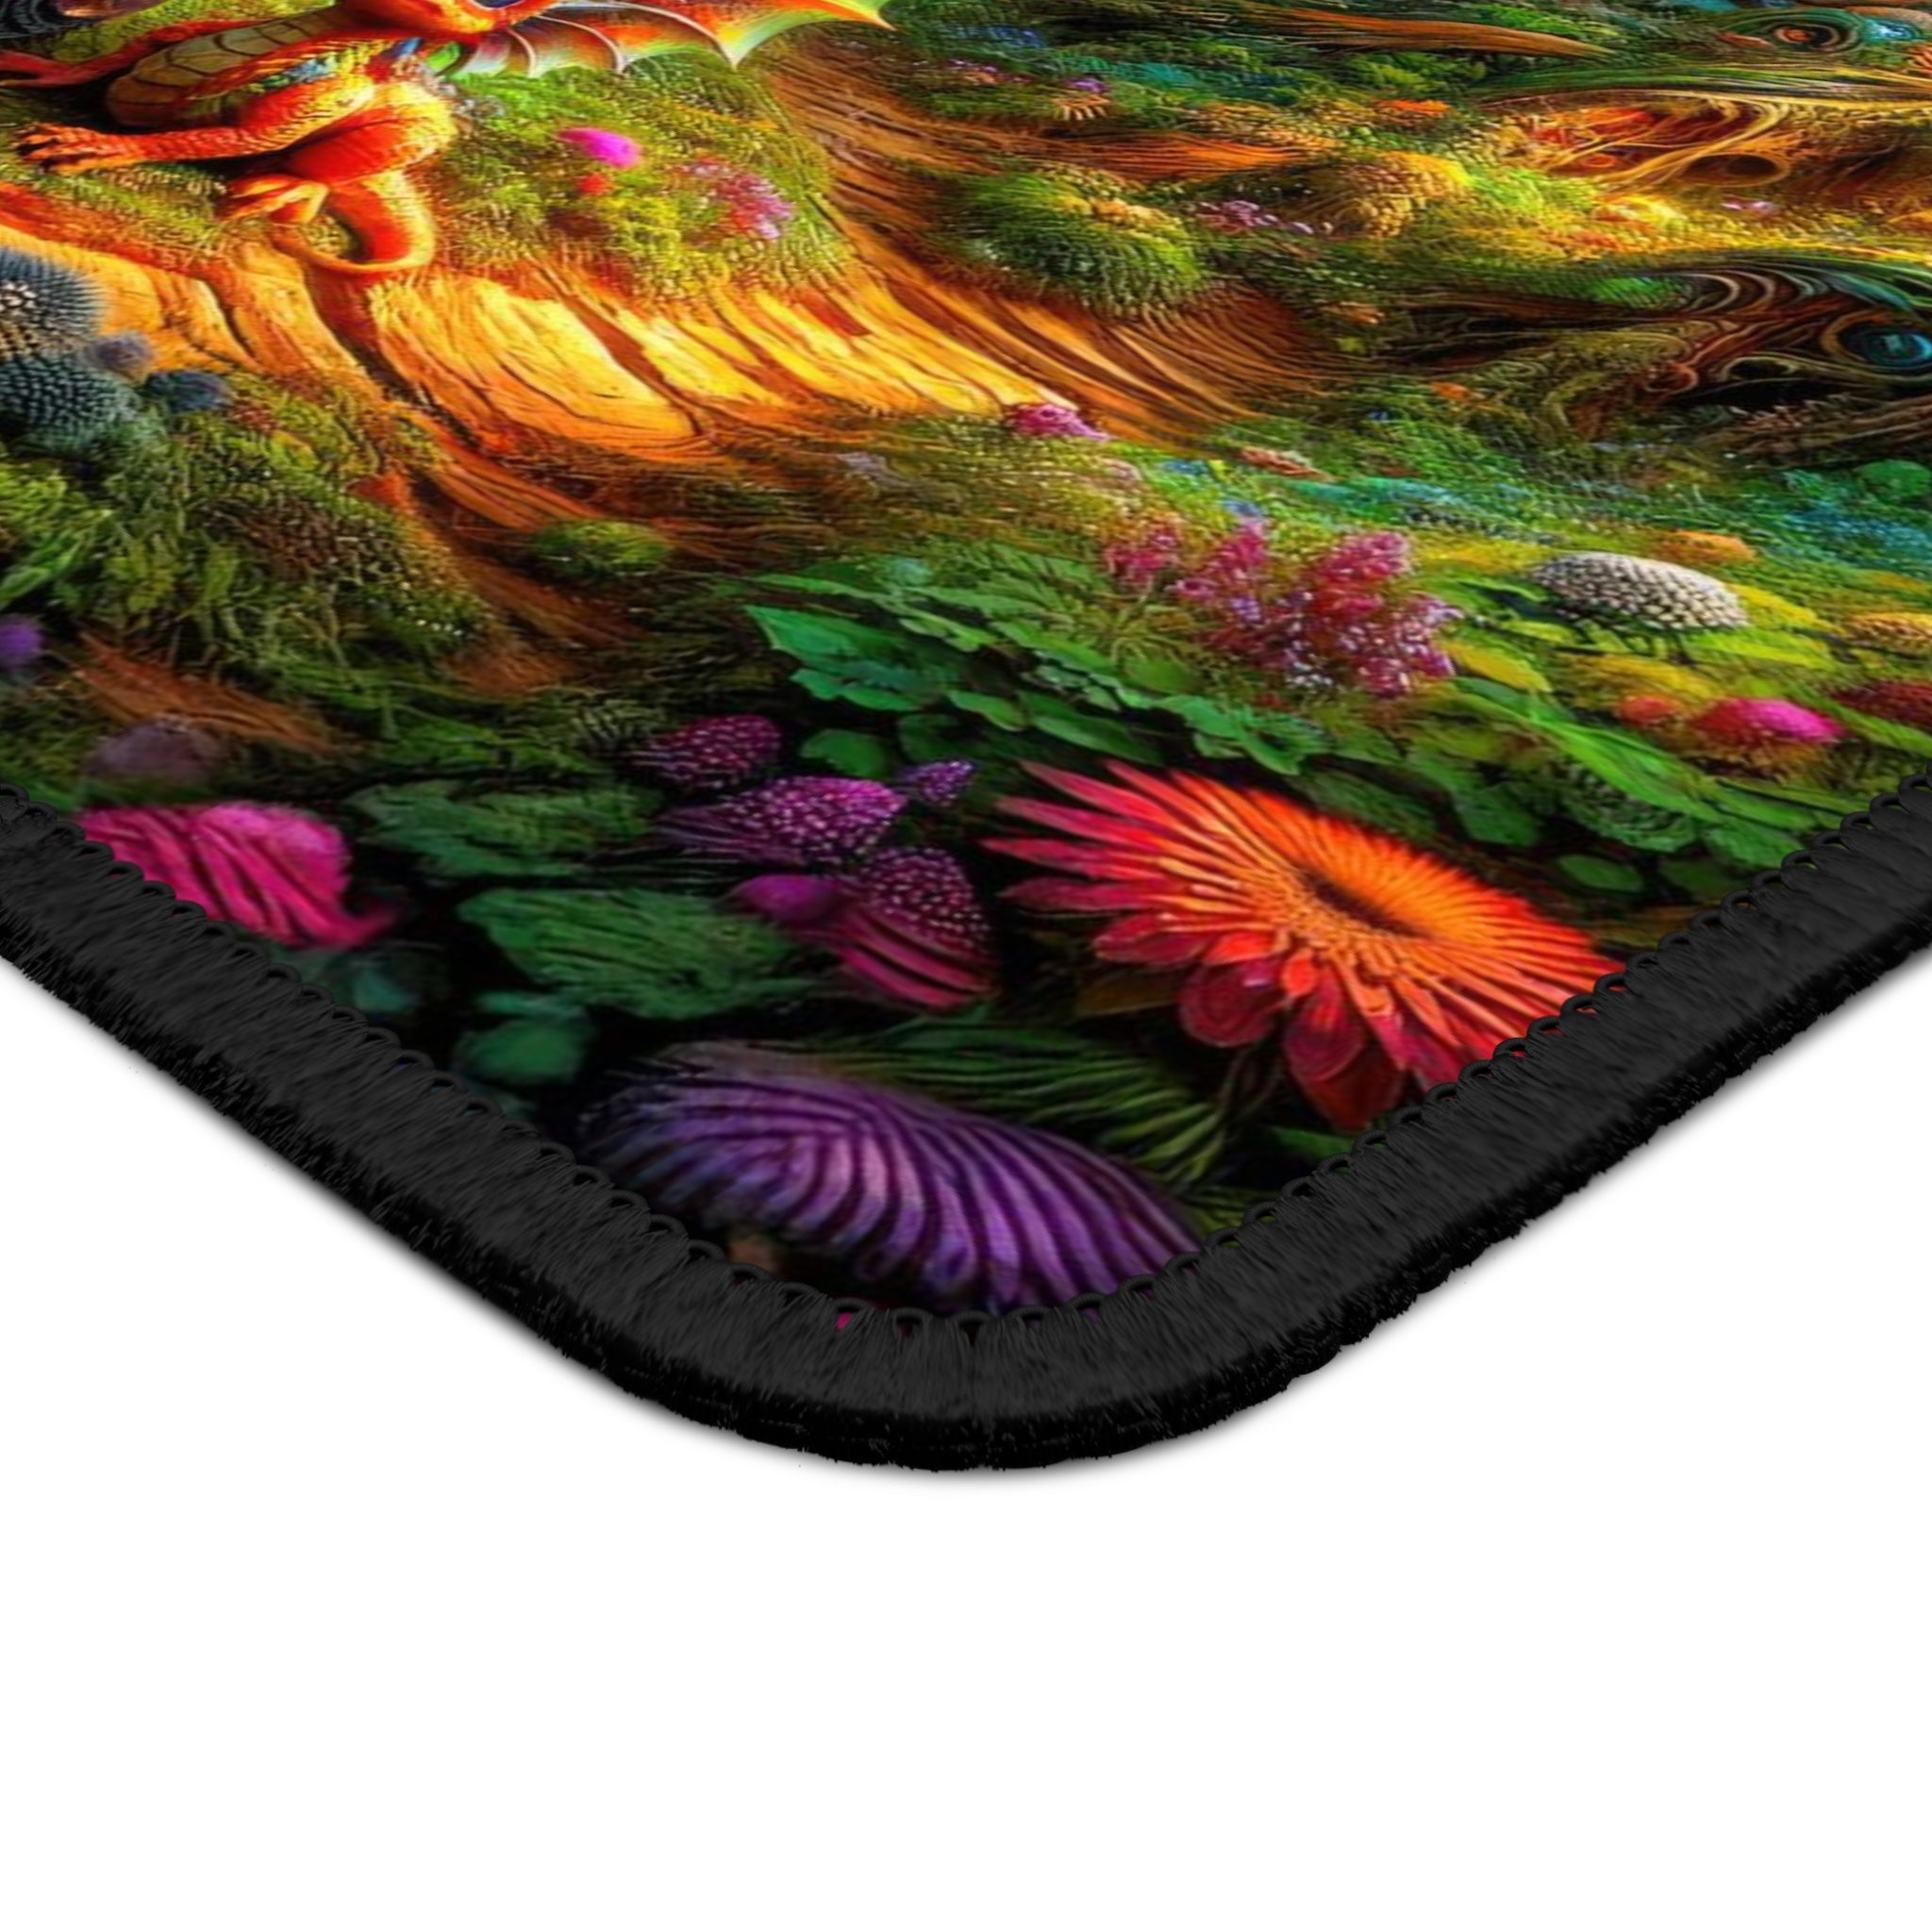 The Gnome's Enchanted Rendezvous Gaming Mouse Pad